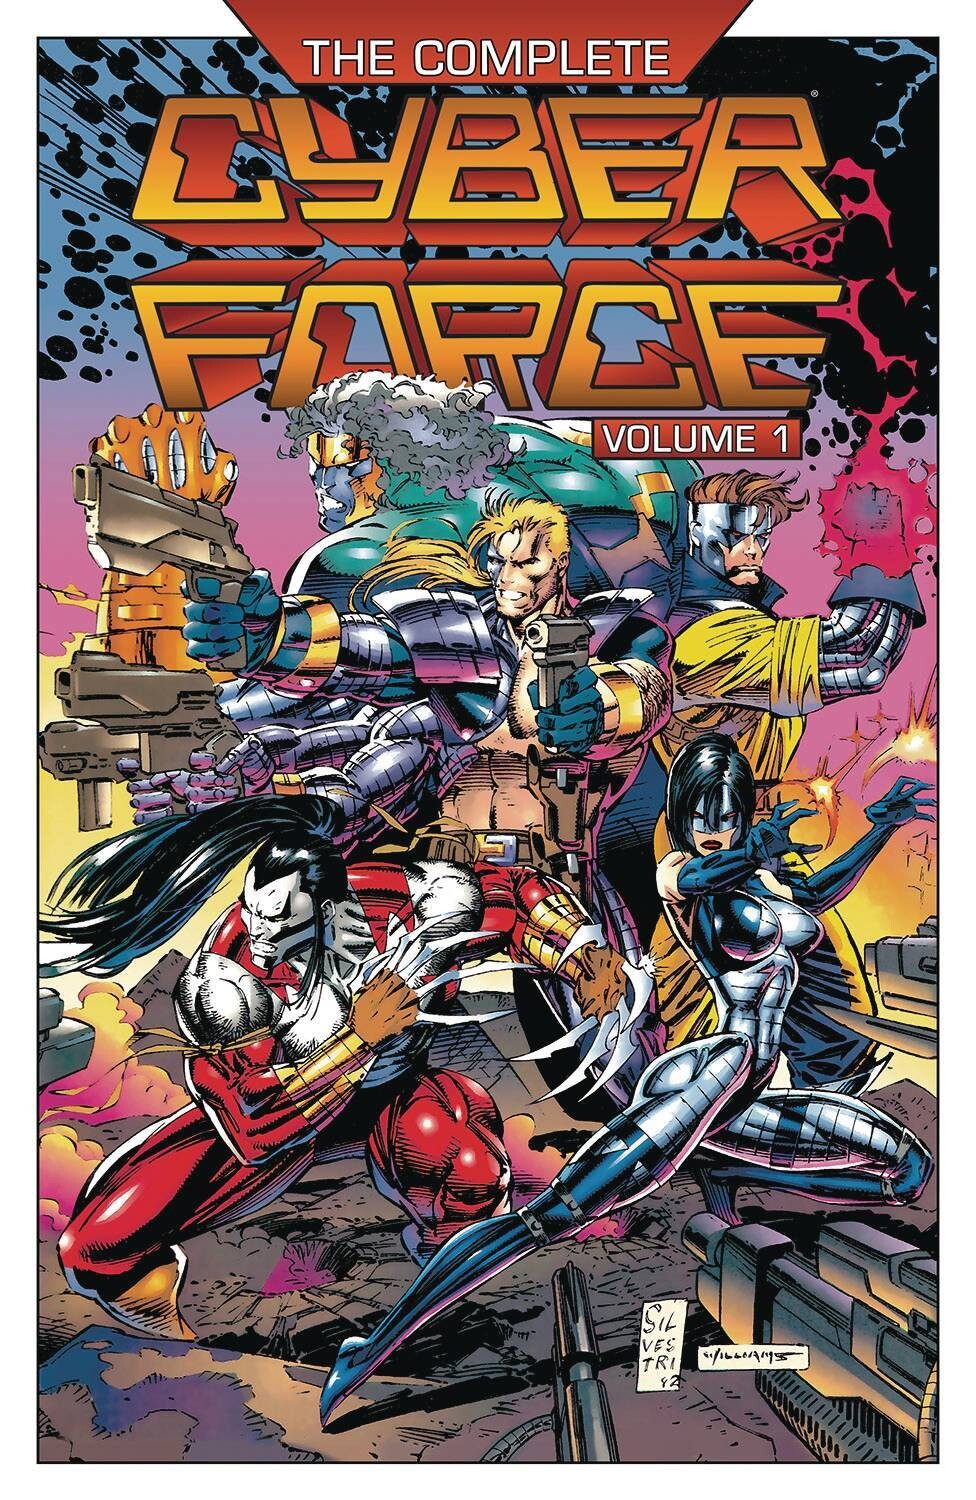 THE COMPLETE CYBER FORCE TP VOL 01